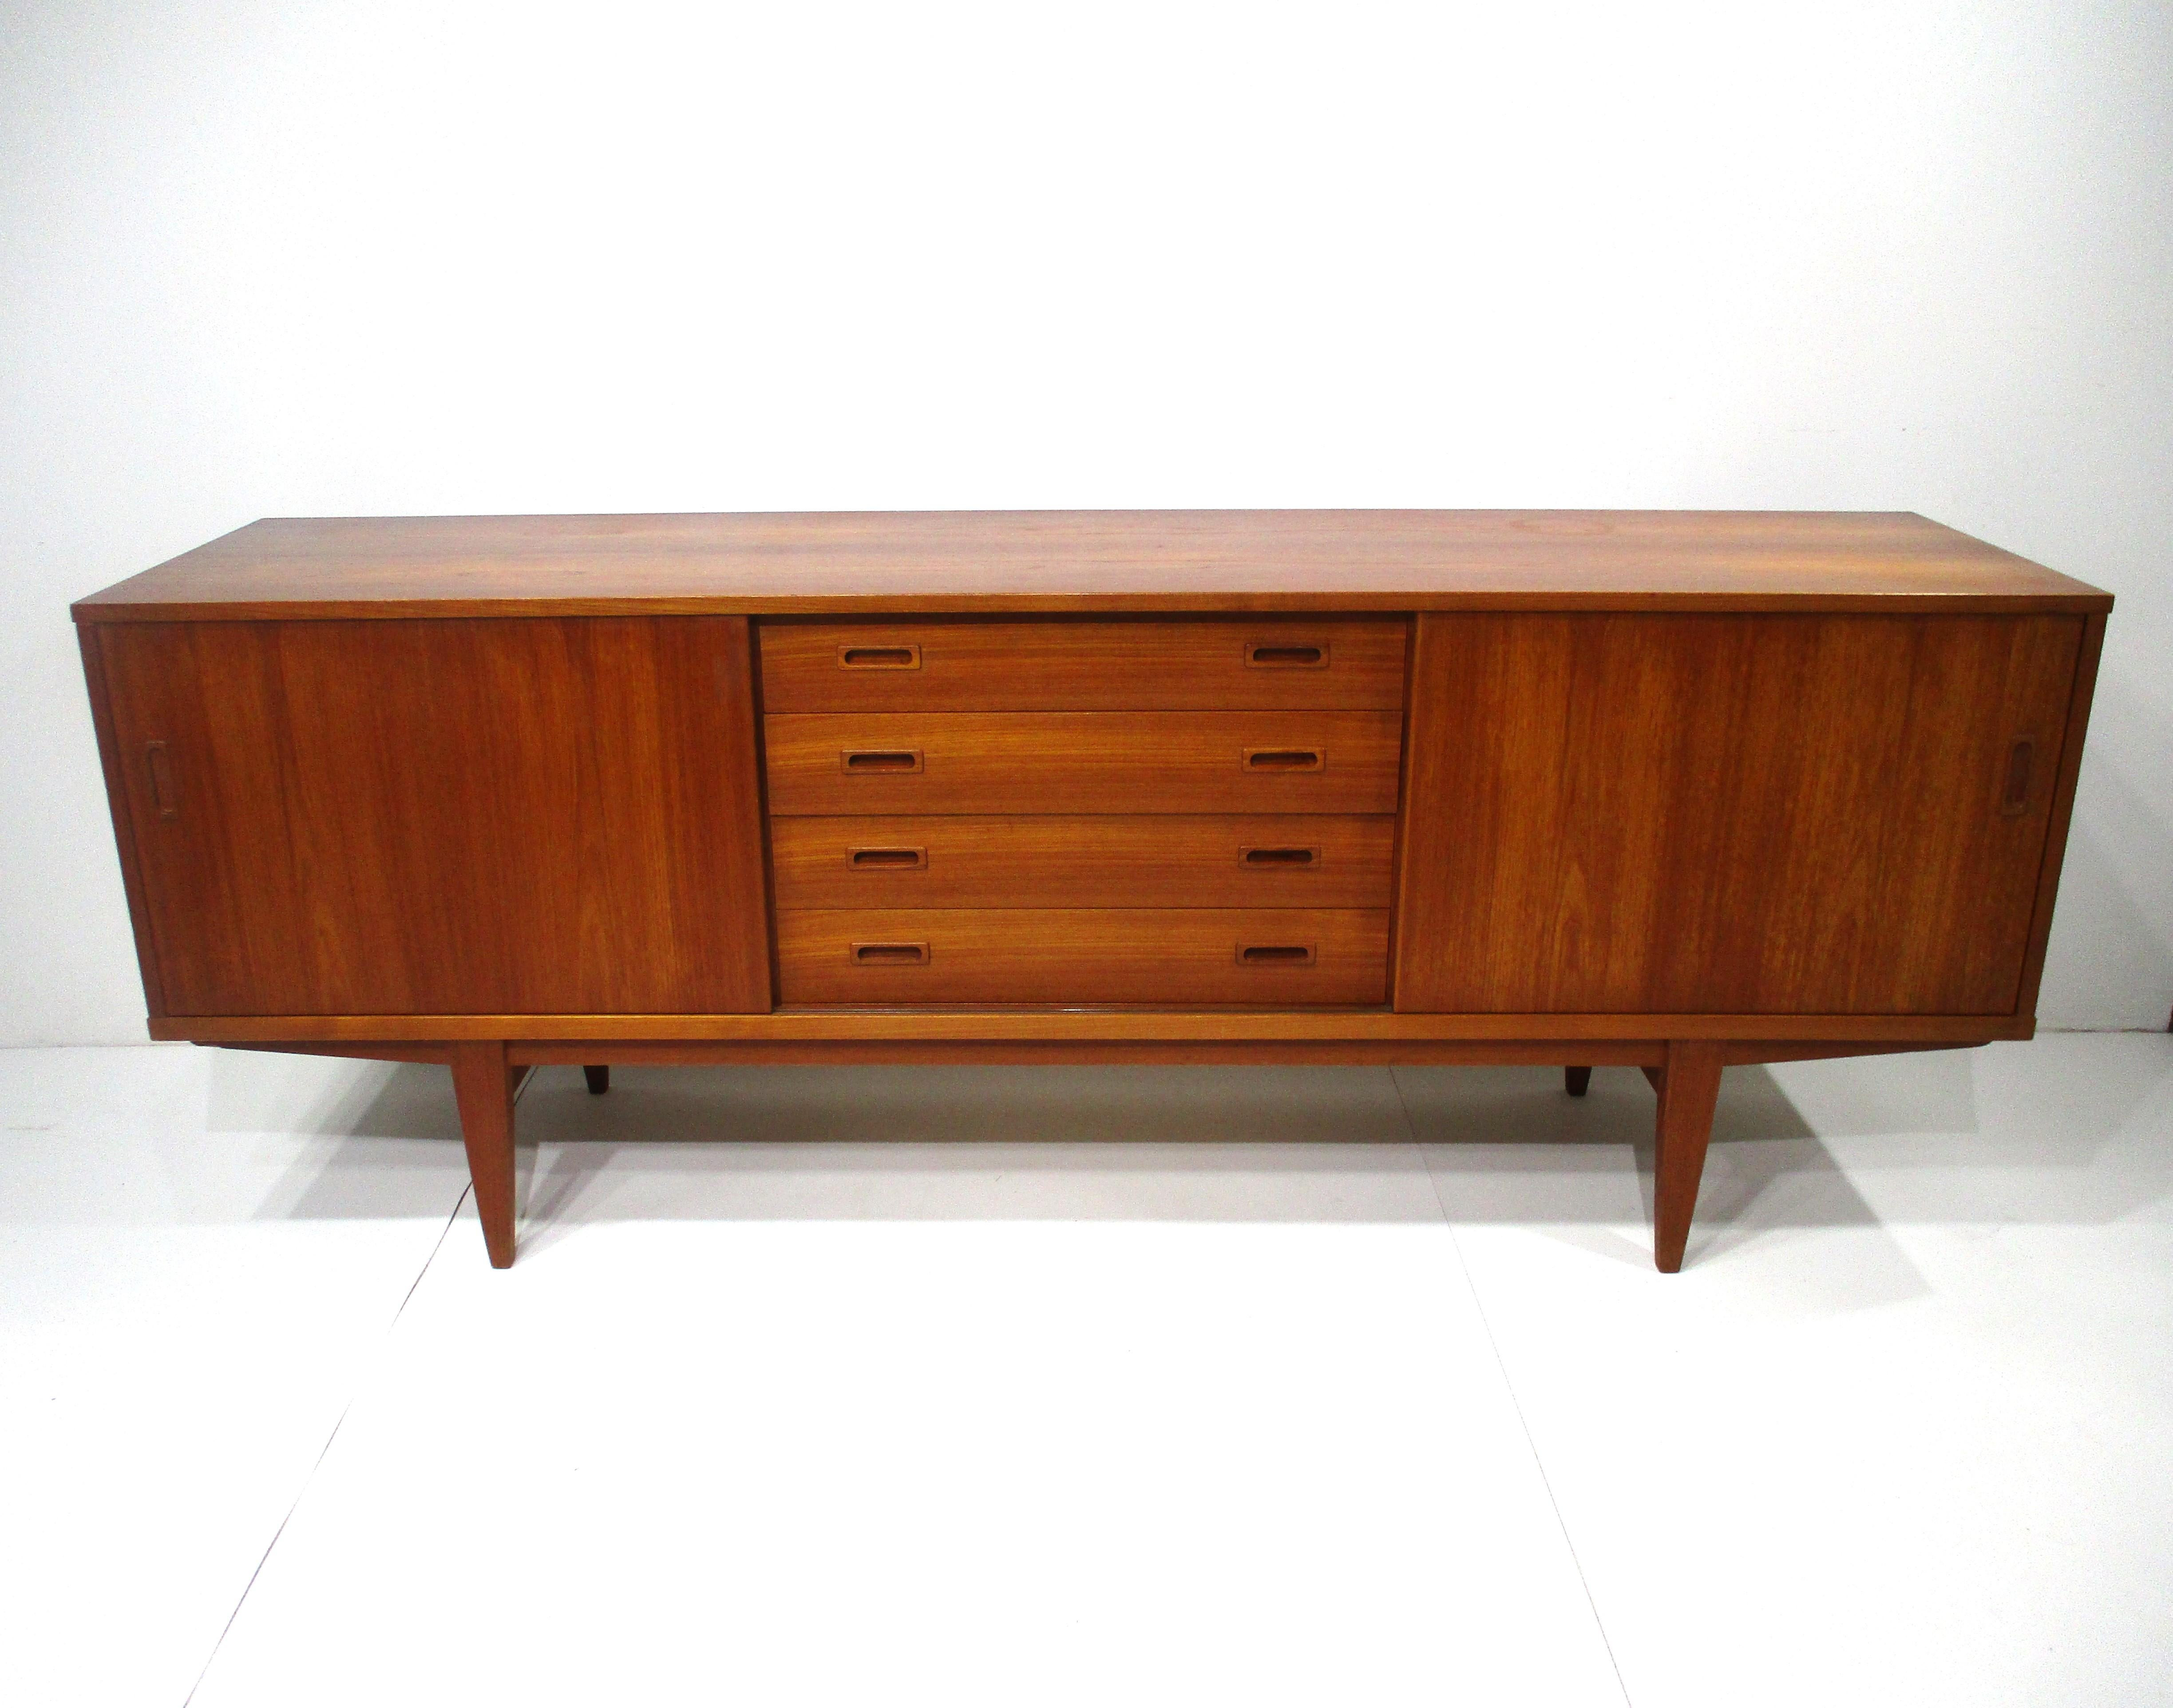 A very well crafted teak wood credenza sever with four drawers to the center the top one having a sliding tray for extra storage . The left side has two adjustable shelves and the other side has one non adjustable shelve with a cut out for taller